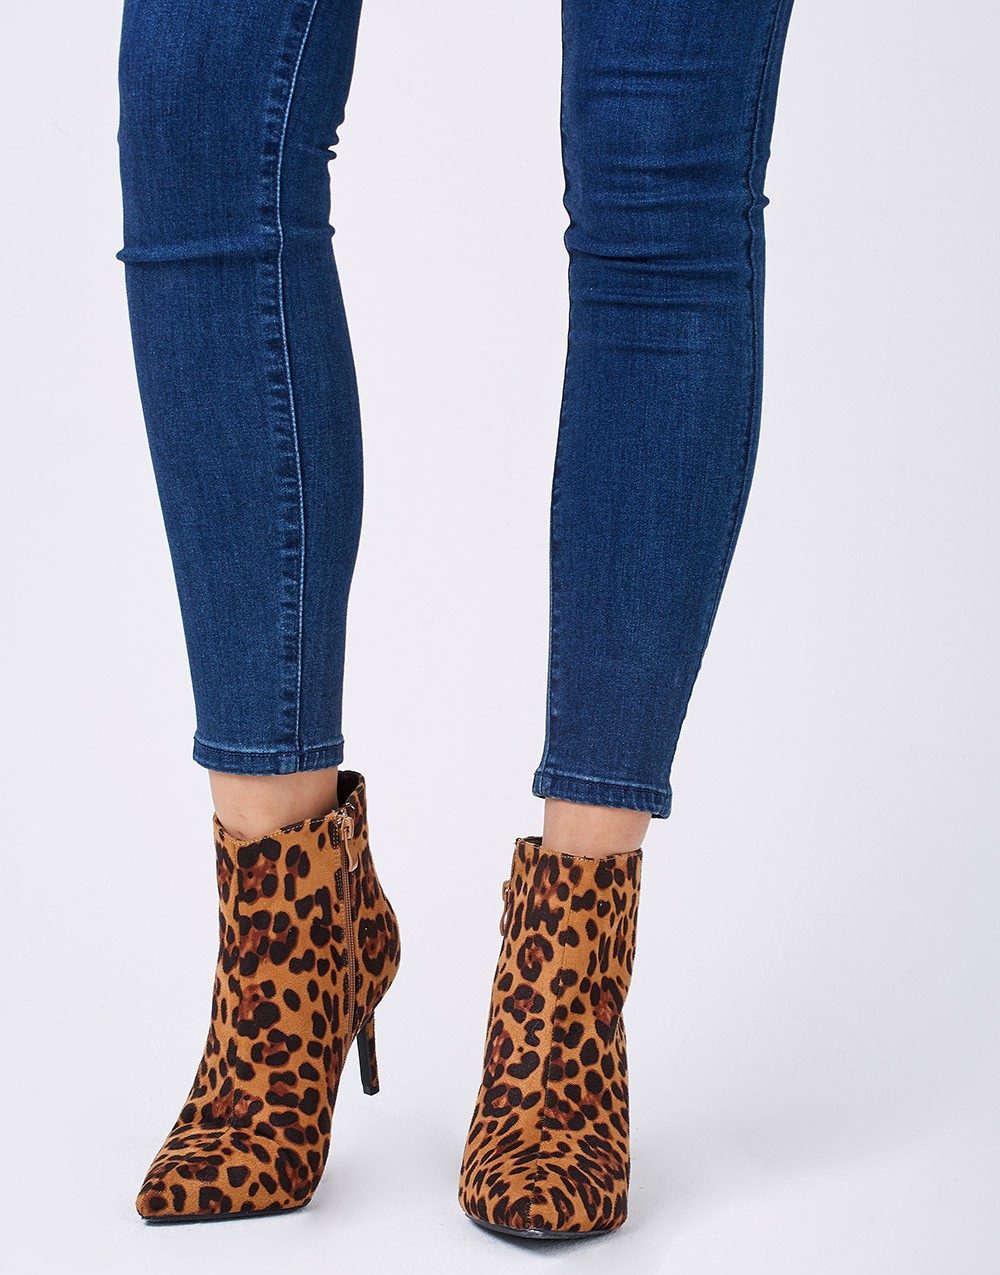 Leopard Print Ankle Boots With Thin Heel